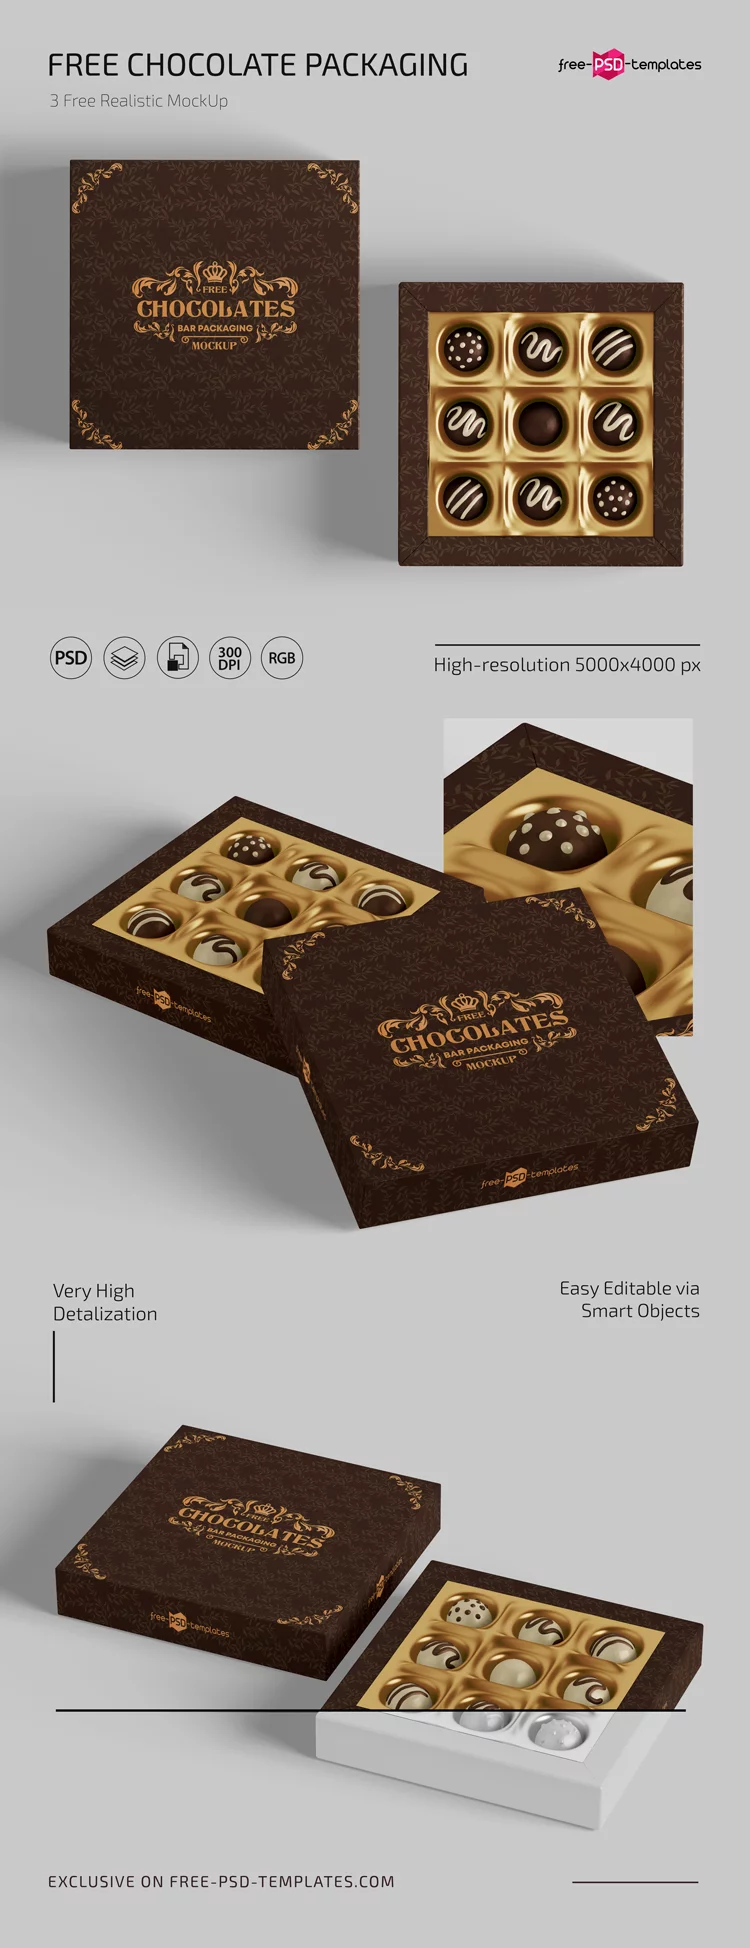 Free Chocolate Packaging Mockups in PSD